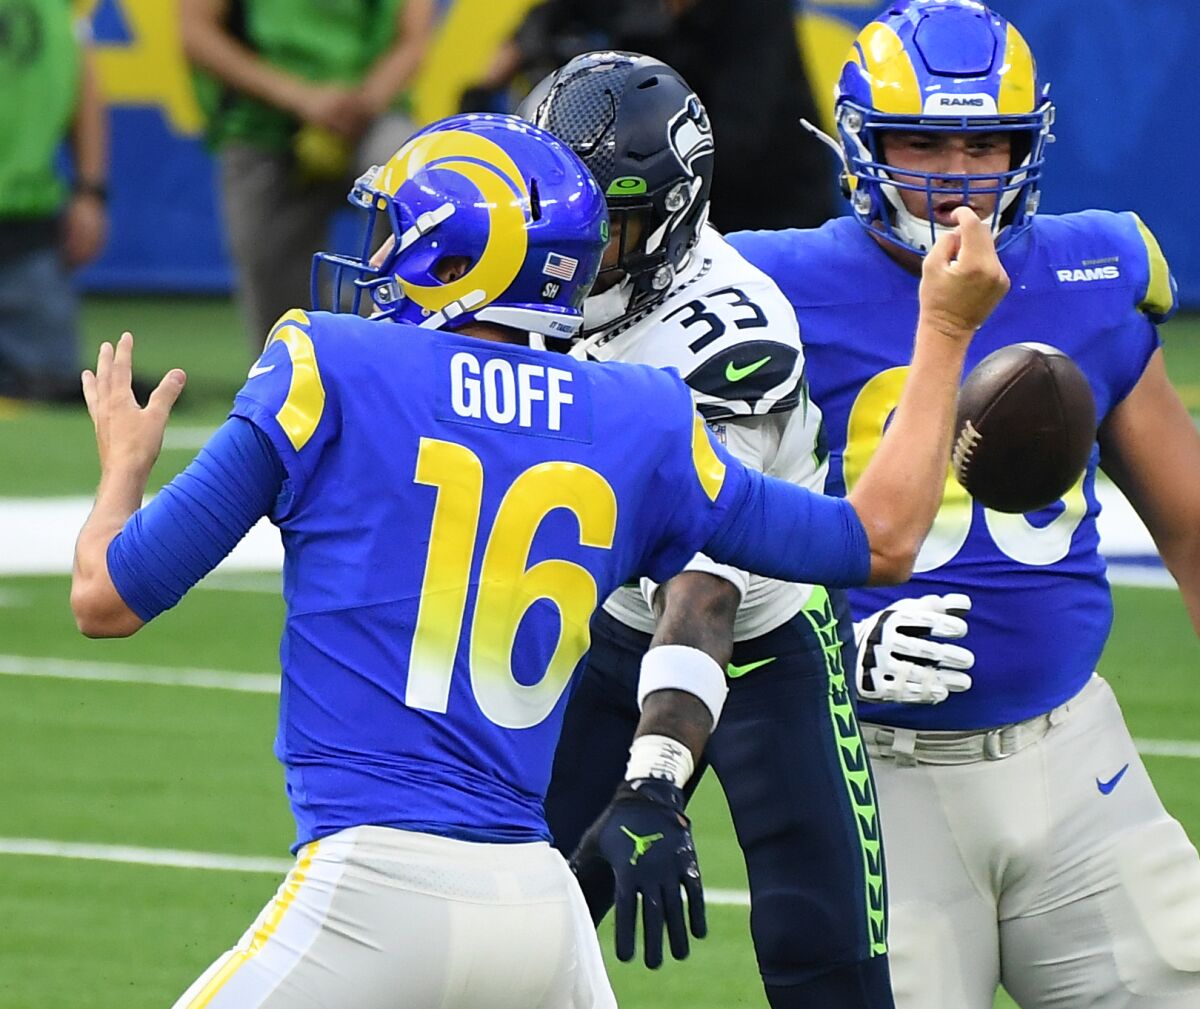 Seattle Seahawks safety Jamal Adams knocks the ball out of Rams quarterback Jared Goff's hand.